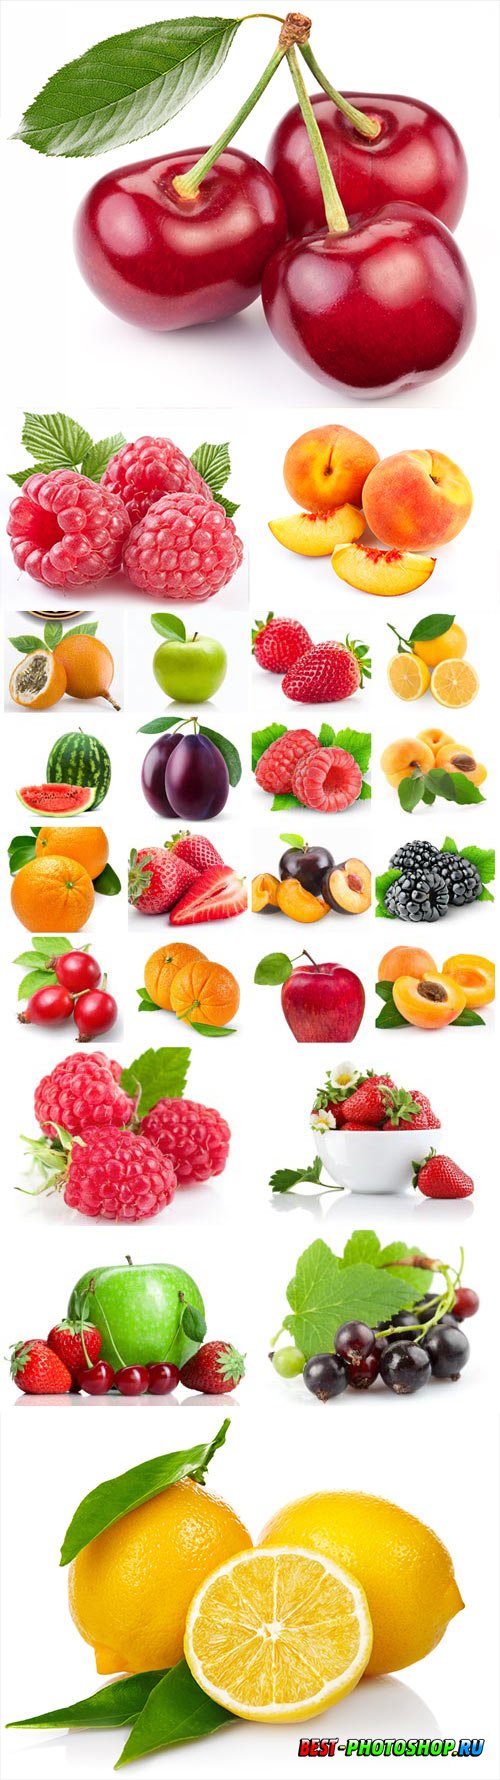 Set of fruits berries and citrus stock photo